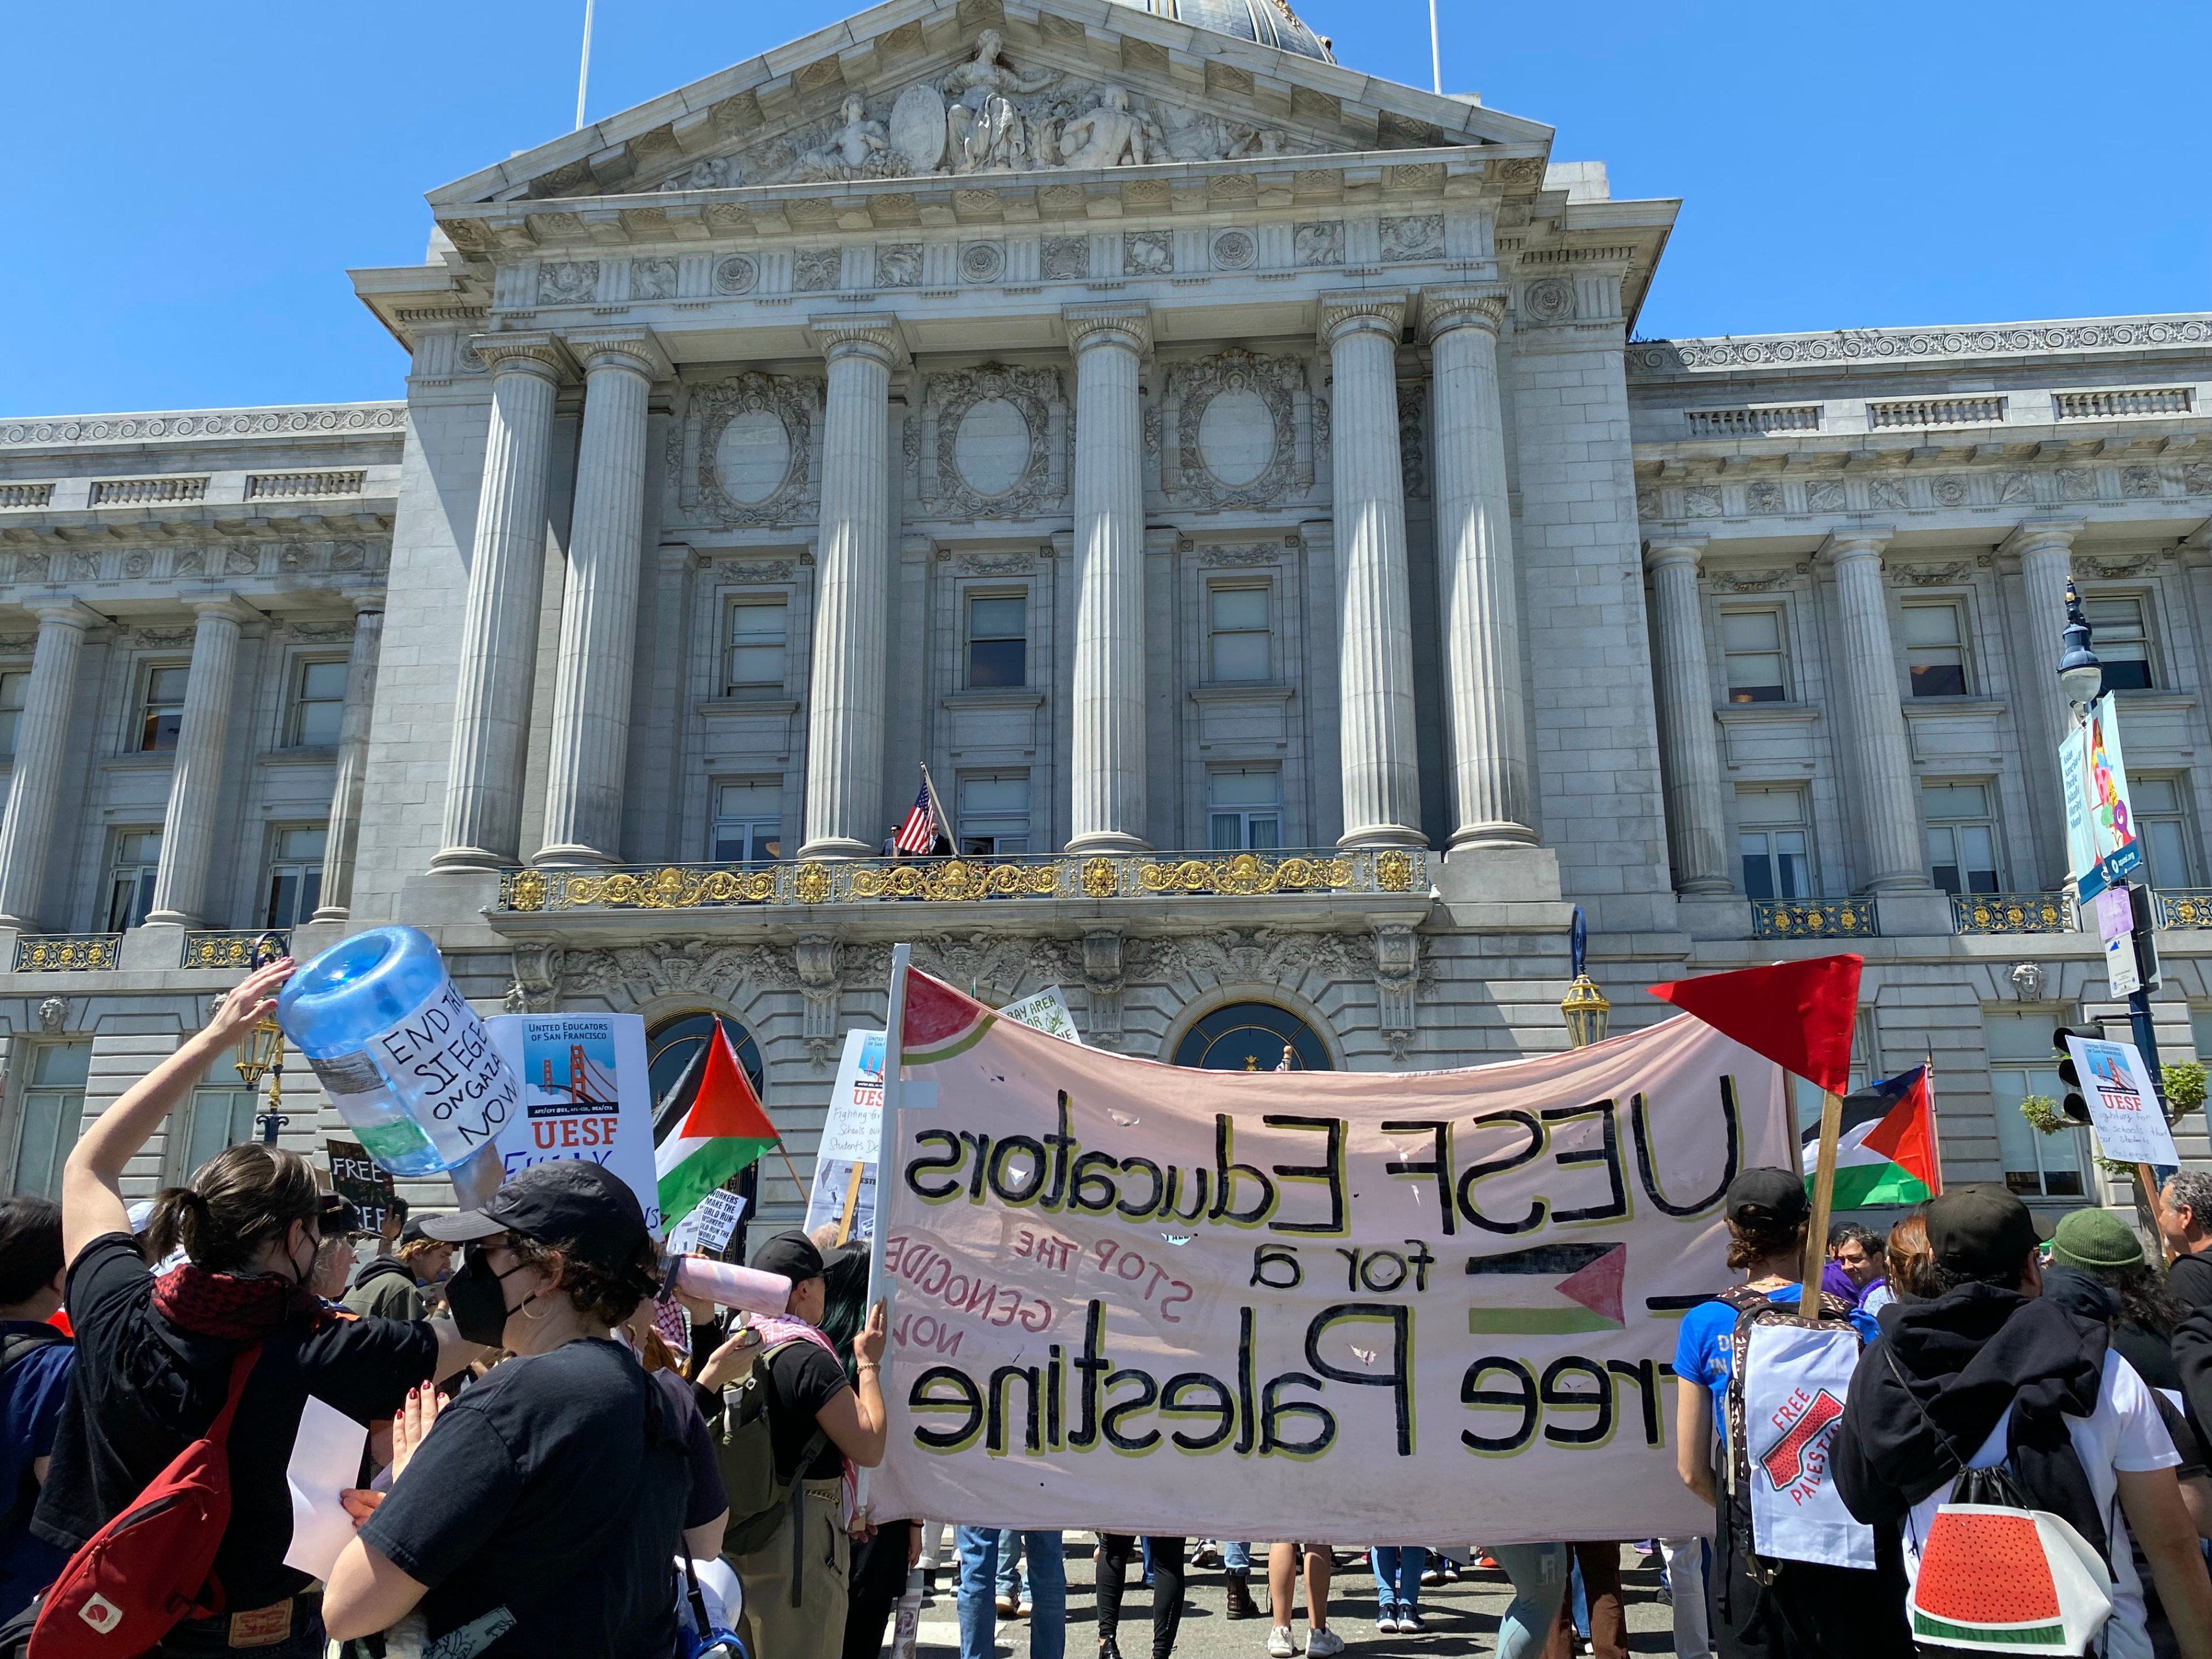 Protesters with banners in front of a grand building on a sunny day.